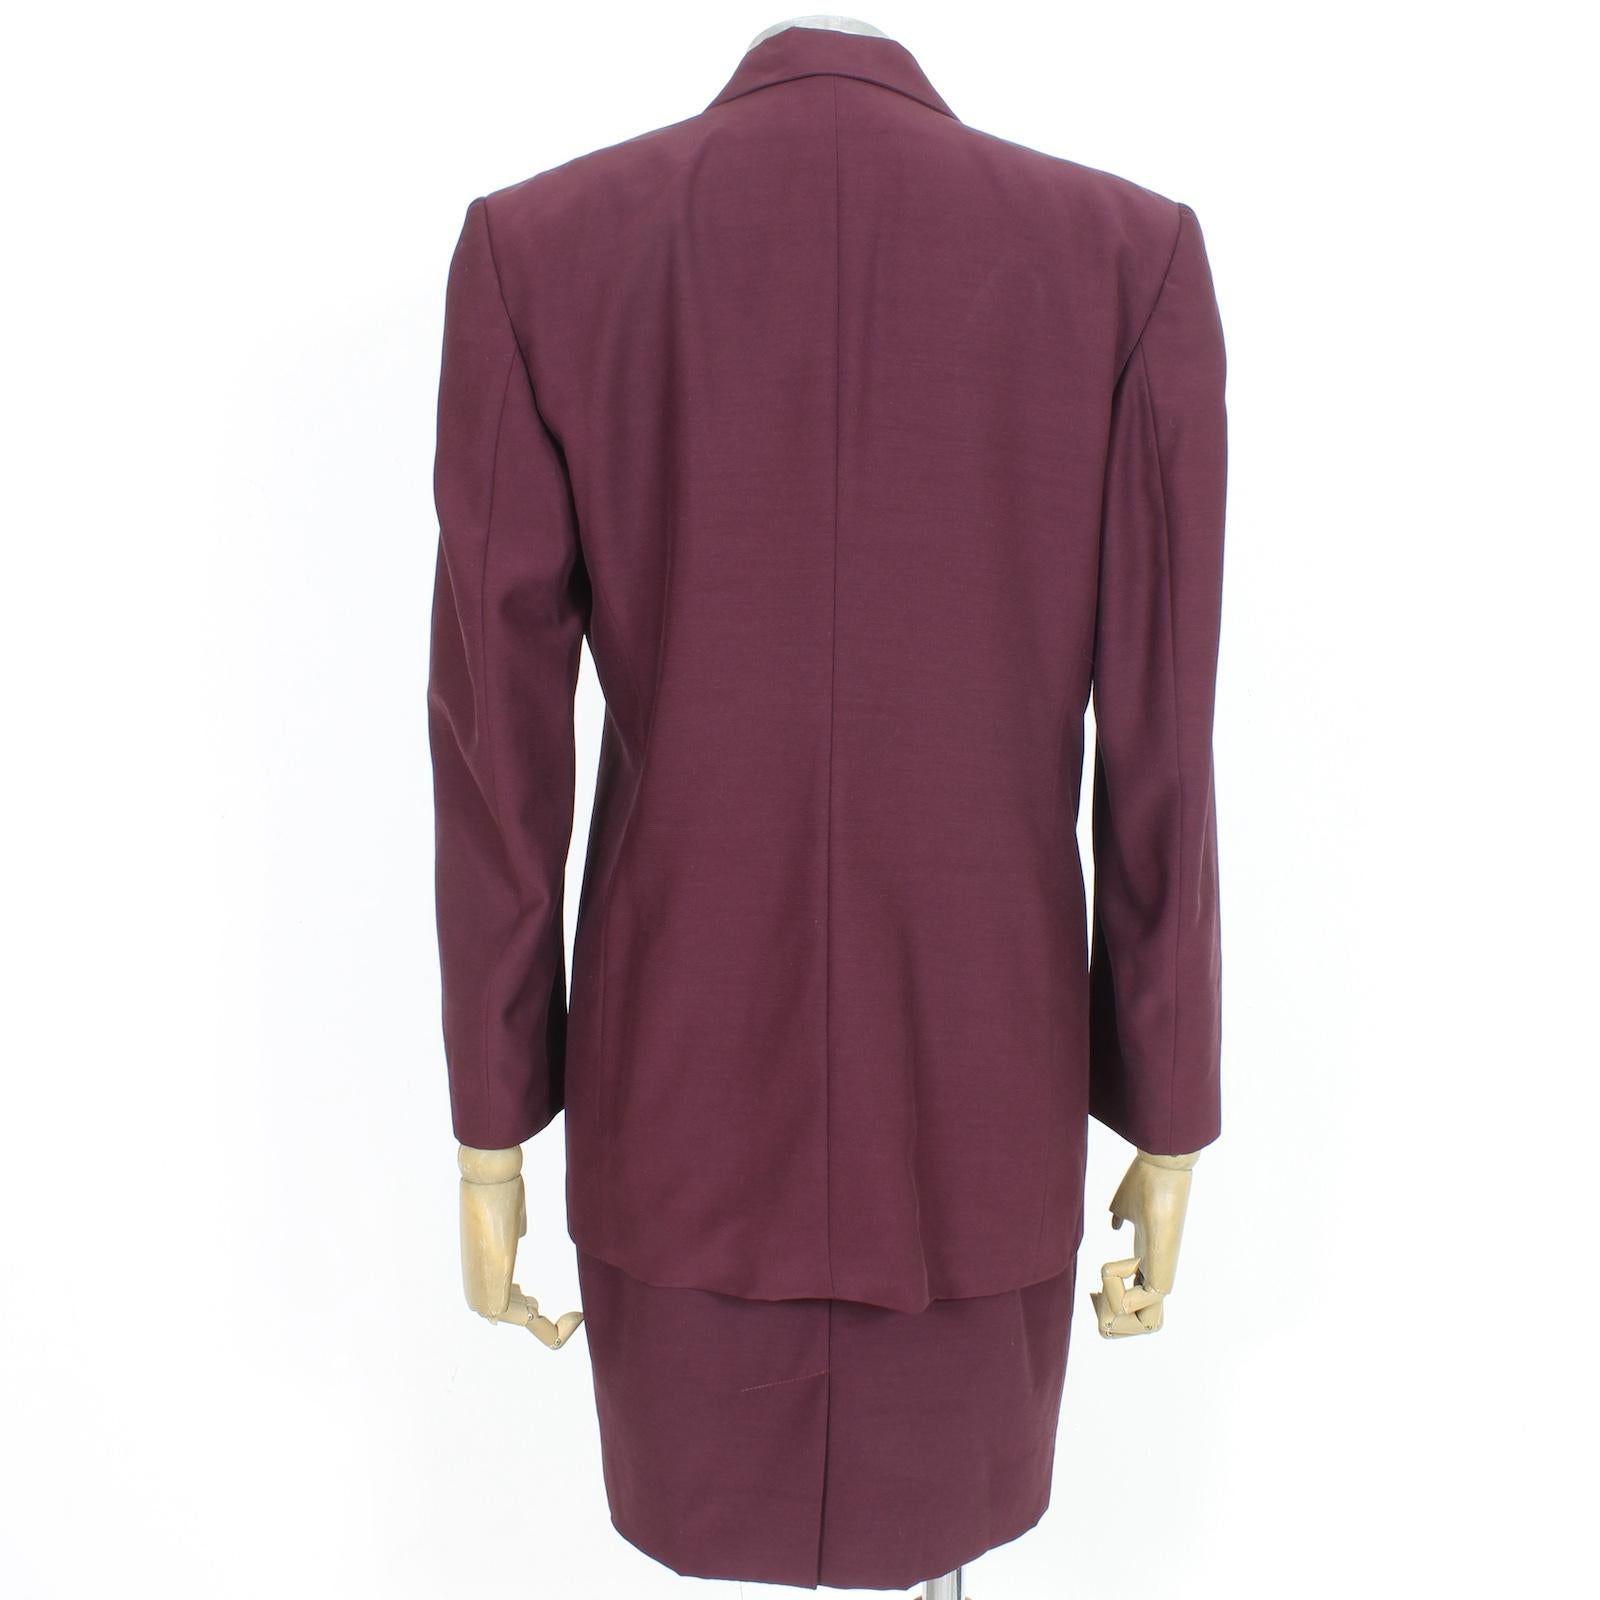 Gianfranco Ferrè elegant vintage 80s suit. Classic style jacket and skirt, burgundy single colour, one button jacket with shoulder pads, pencil skirt, knee length. 57% wool, 43% acetate fabric, internally lined. Made in Italy.

Size: Jacket 44 It 10